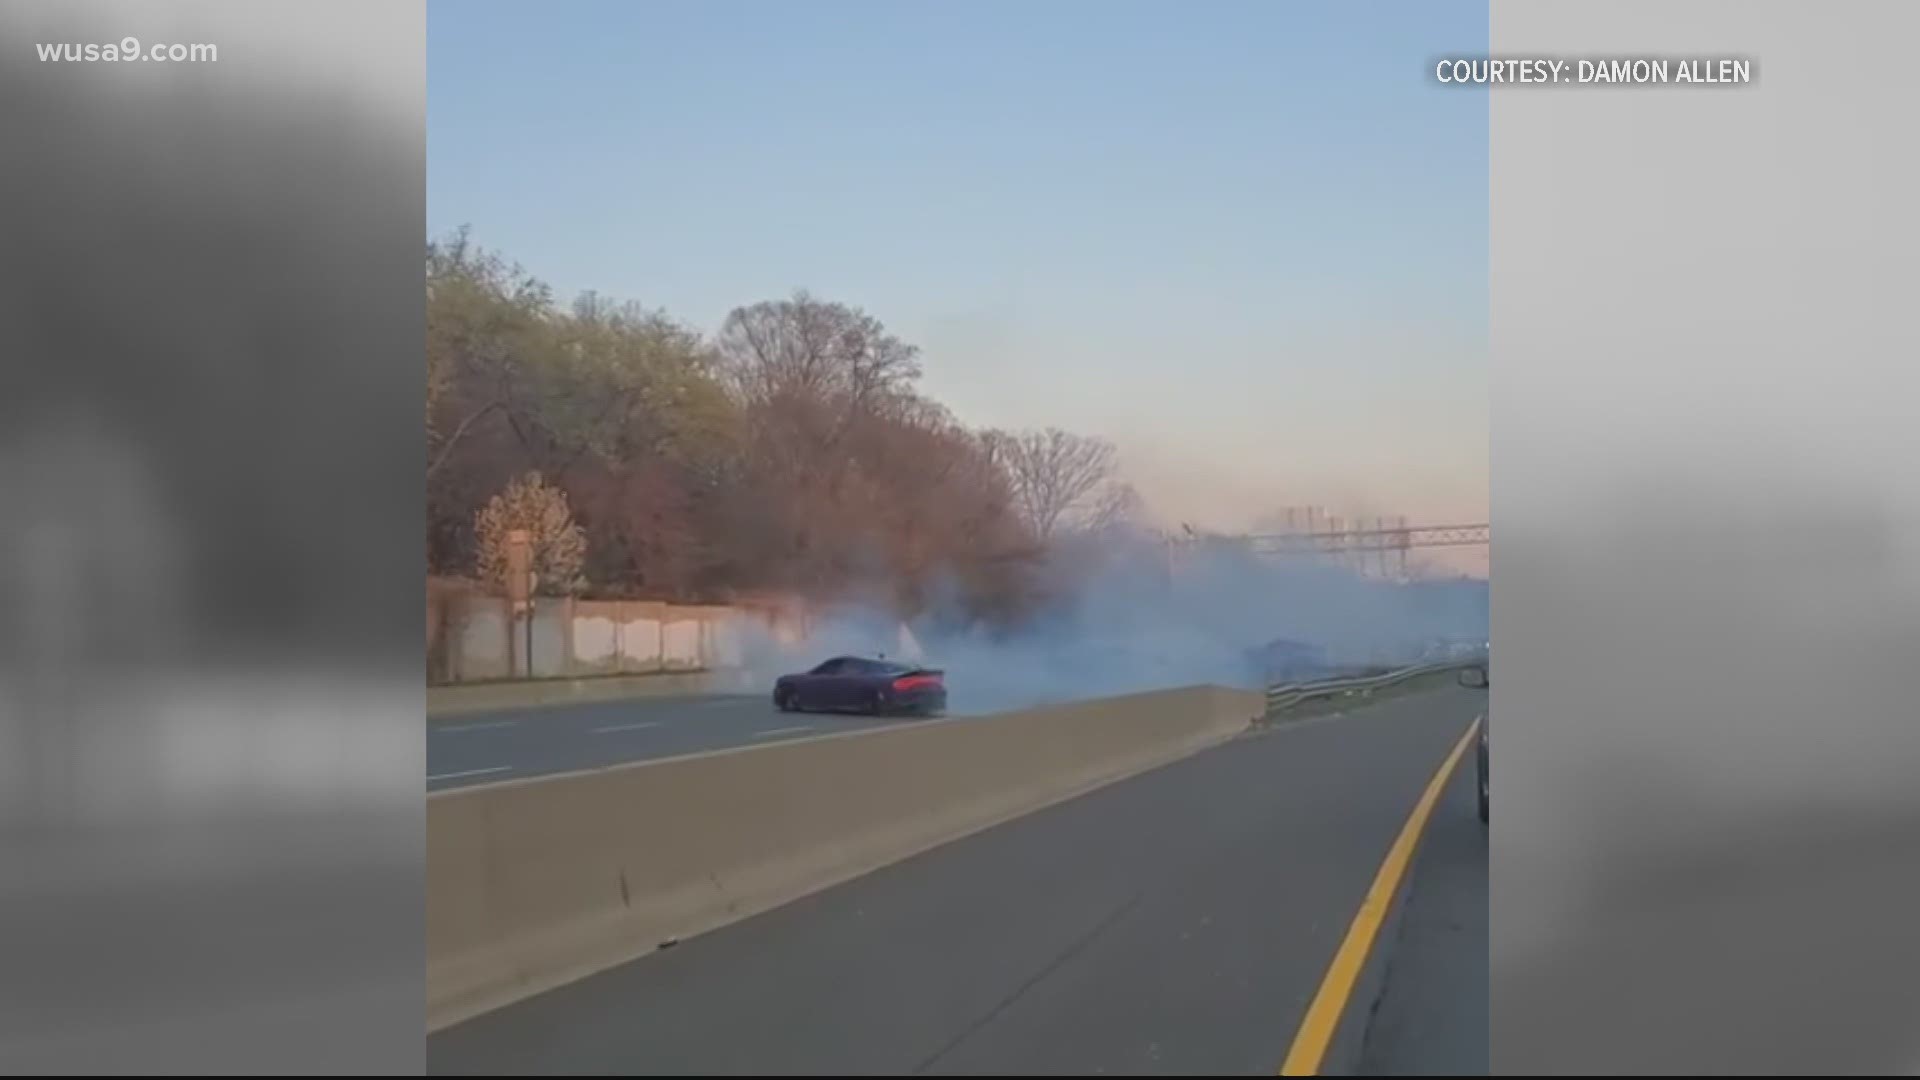 A couple who captured one of the viral videos Saturday said cars were stopped on the Beltway for miles as multiple cars did donuts on the inner loop of I-495.